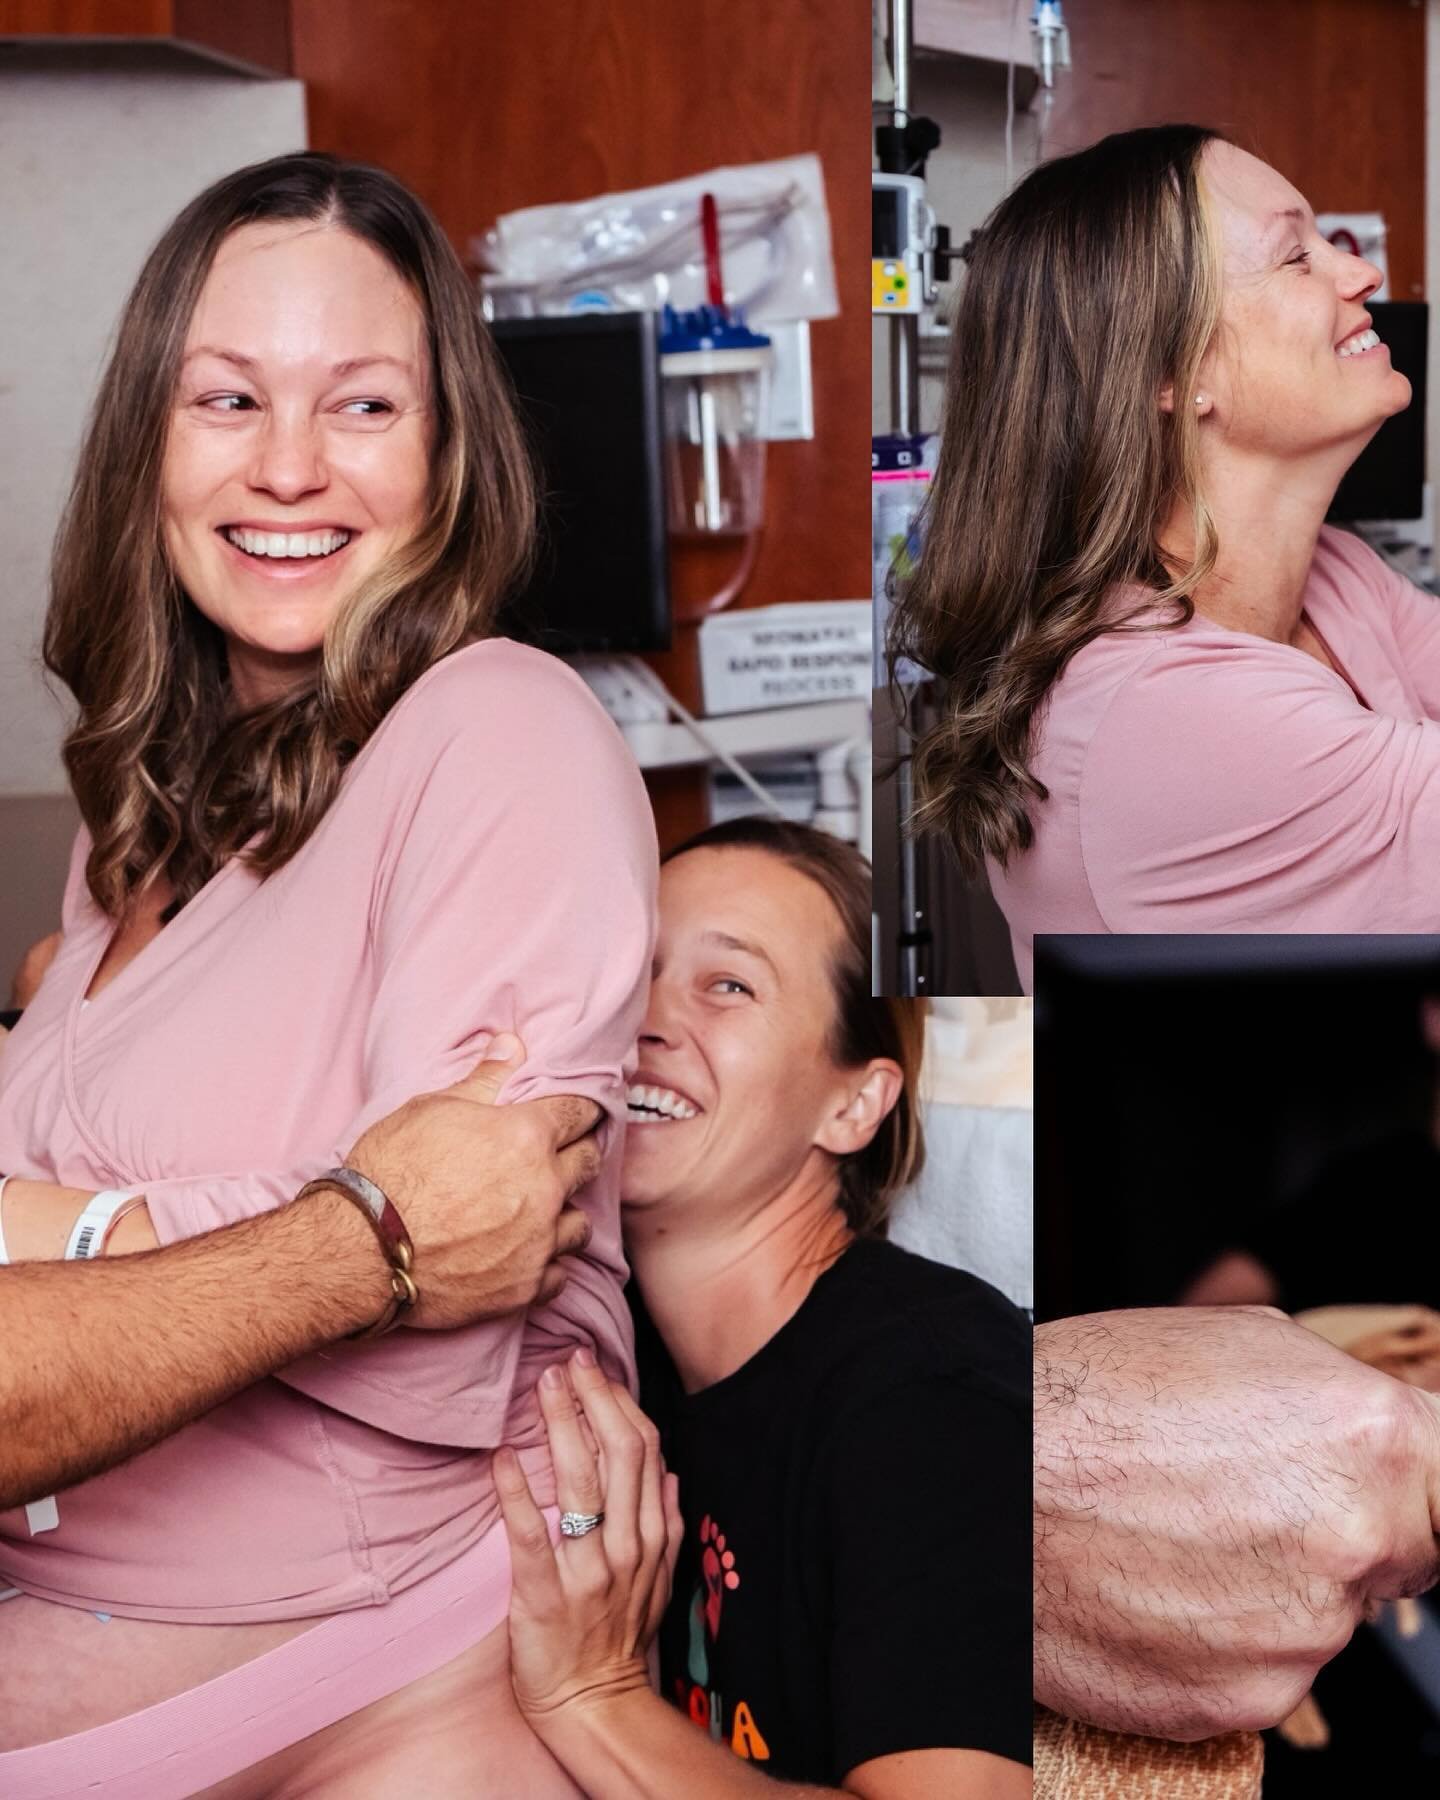 This was such a joyful birth! There was so much laughter and excitement after waters broke and things got much more intense. Moments during transition of, &ldquo;I&rsquo;m so happy this is happening!&rdquo; or &ldquo;I can&rsquo;t wait to meet them!&